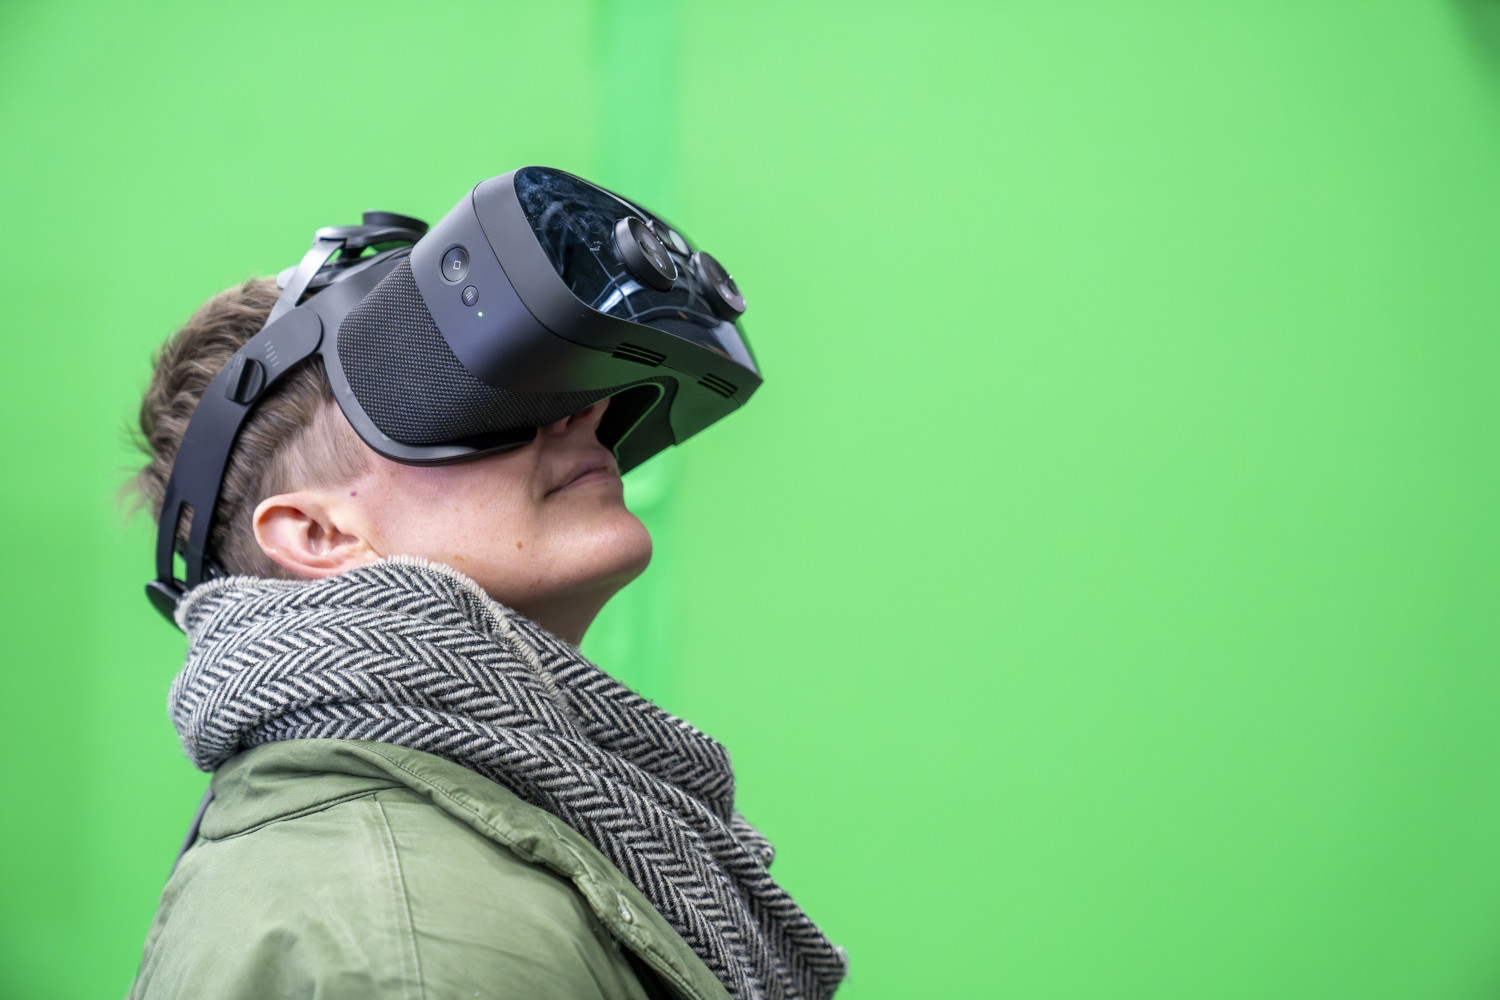 A woman wearing a vr headset. She is in front of a green screen